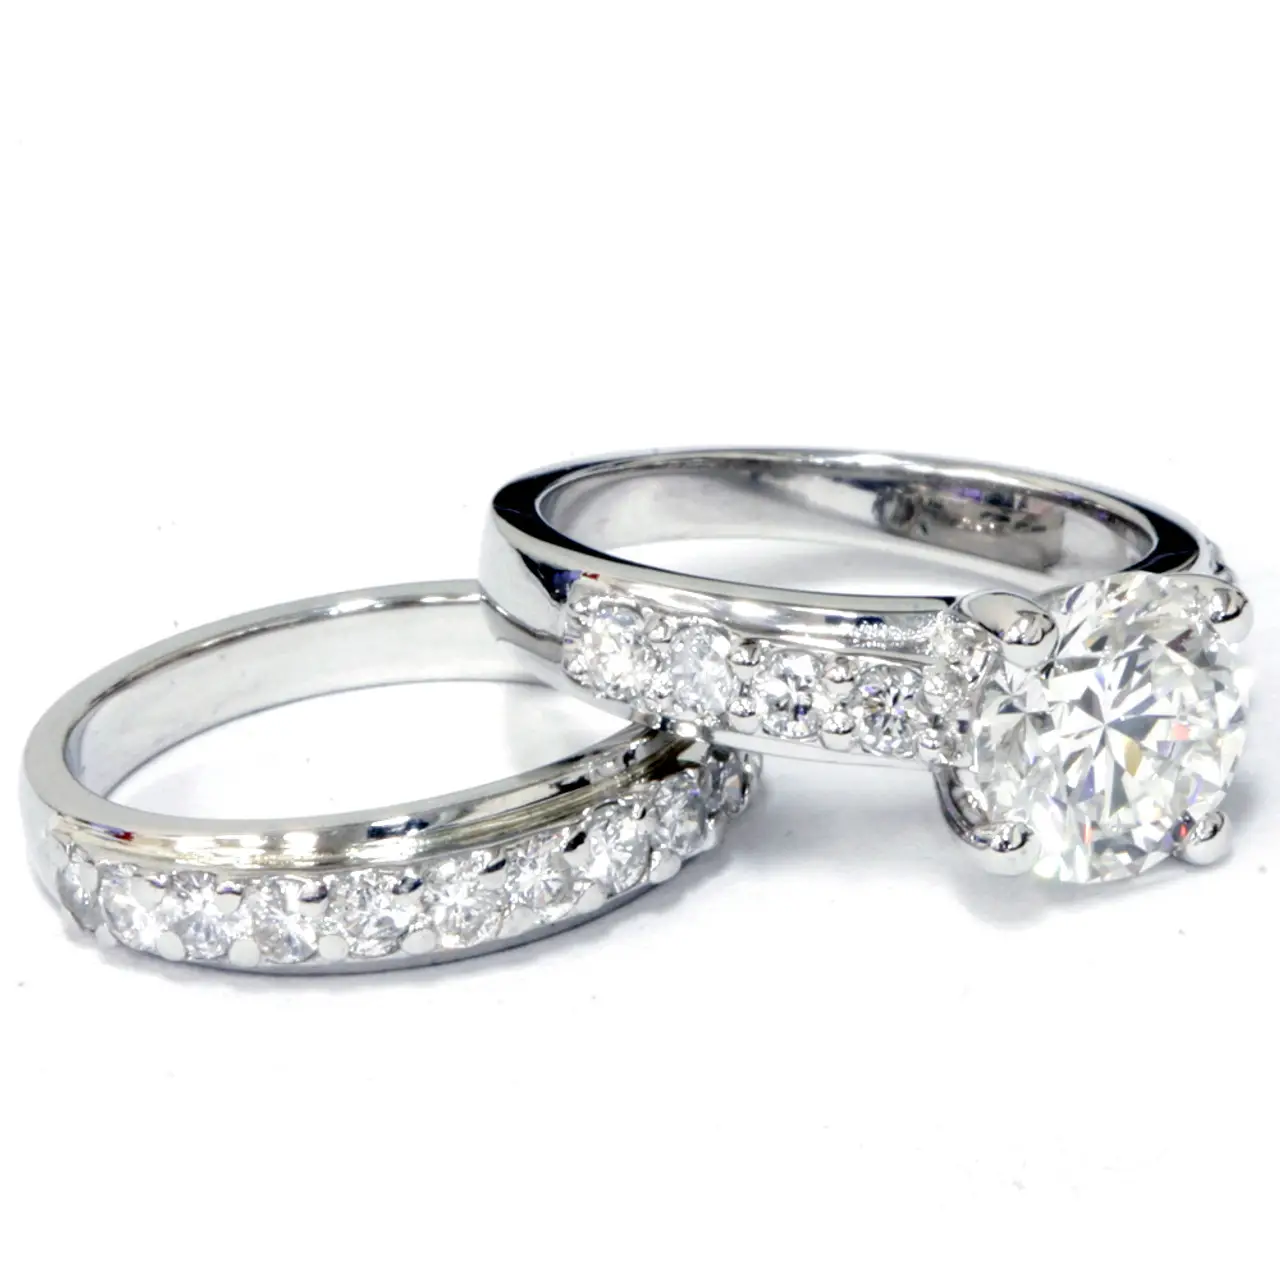 Cheap White Gold Wedding Rings Sets For Him And Her